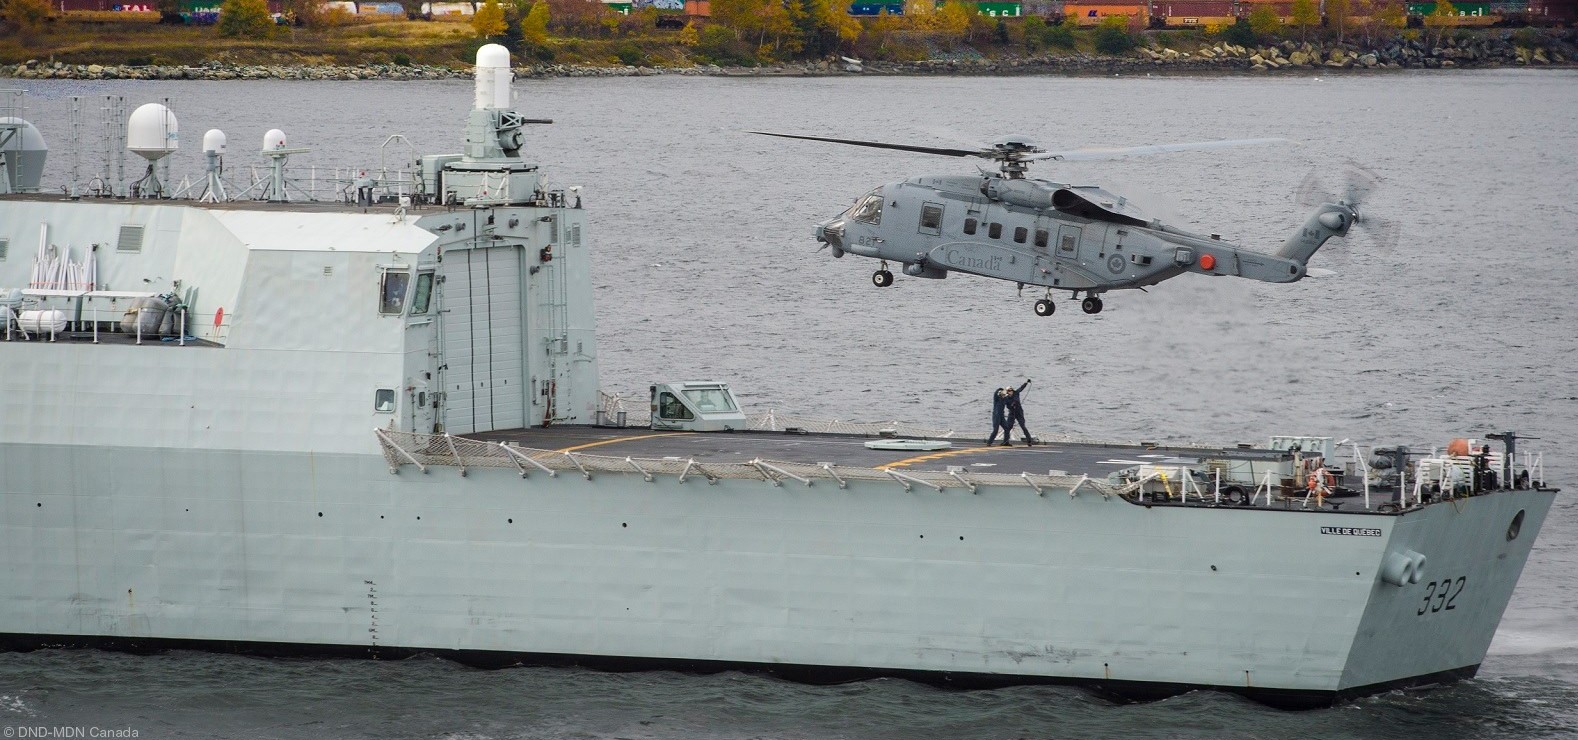 ffh-332 hmcs ville de quebec halifax class helicopter patrol frigate ncsm royal canadian navy 41 sikorsky ch-148 cyclone